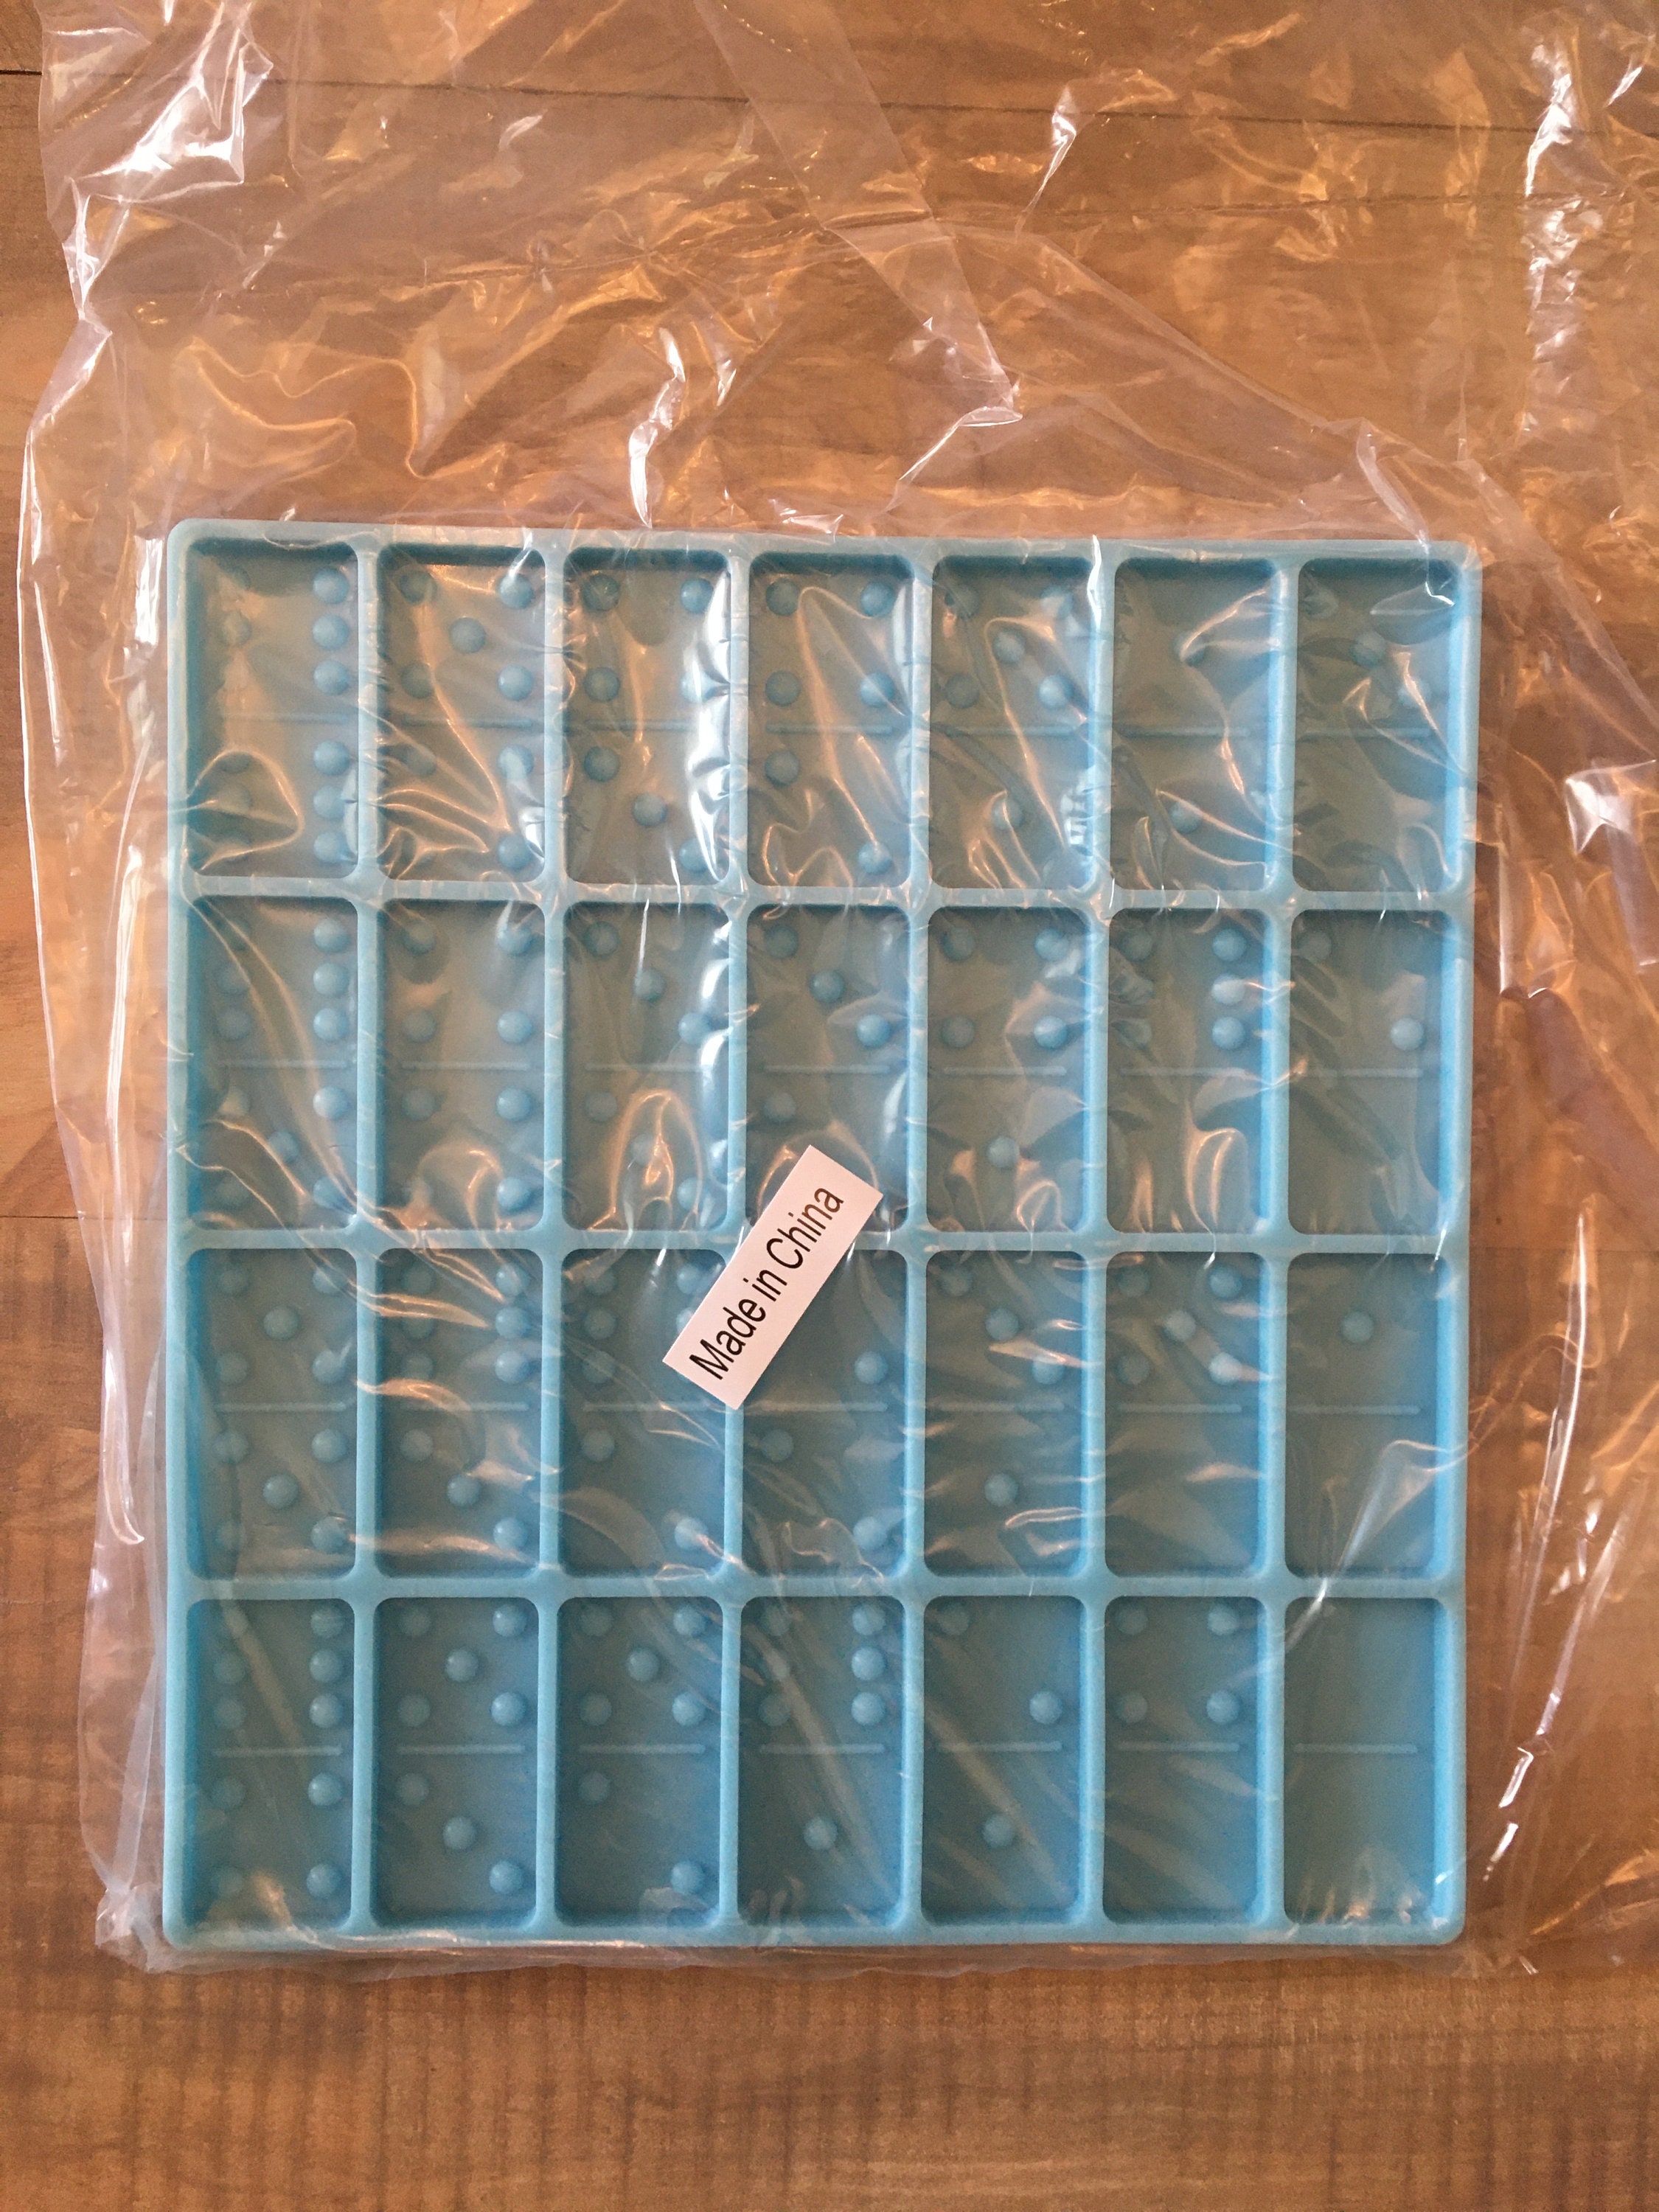 NEW Domino with Leaf Dots - Domino Mold Blue – Puzzle Tumblers